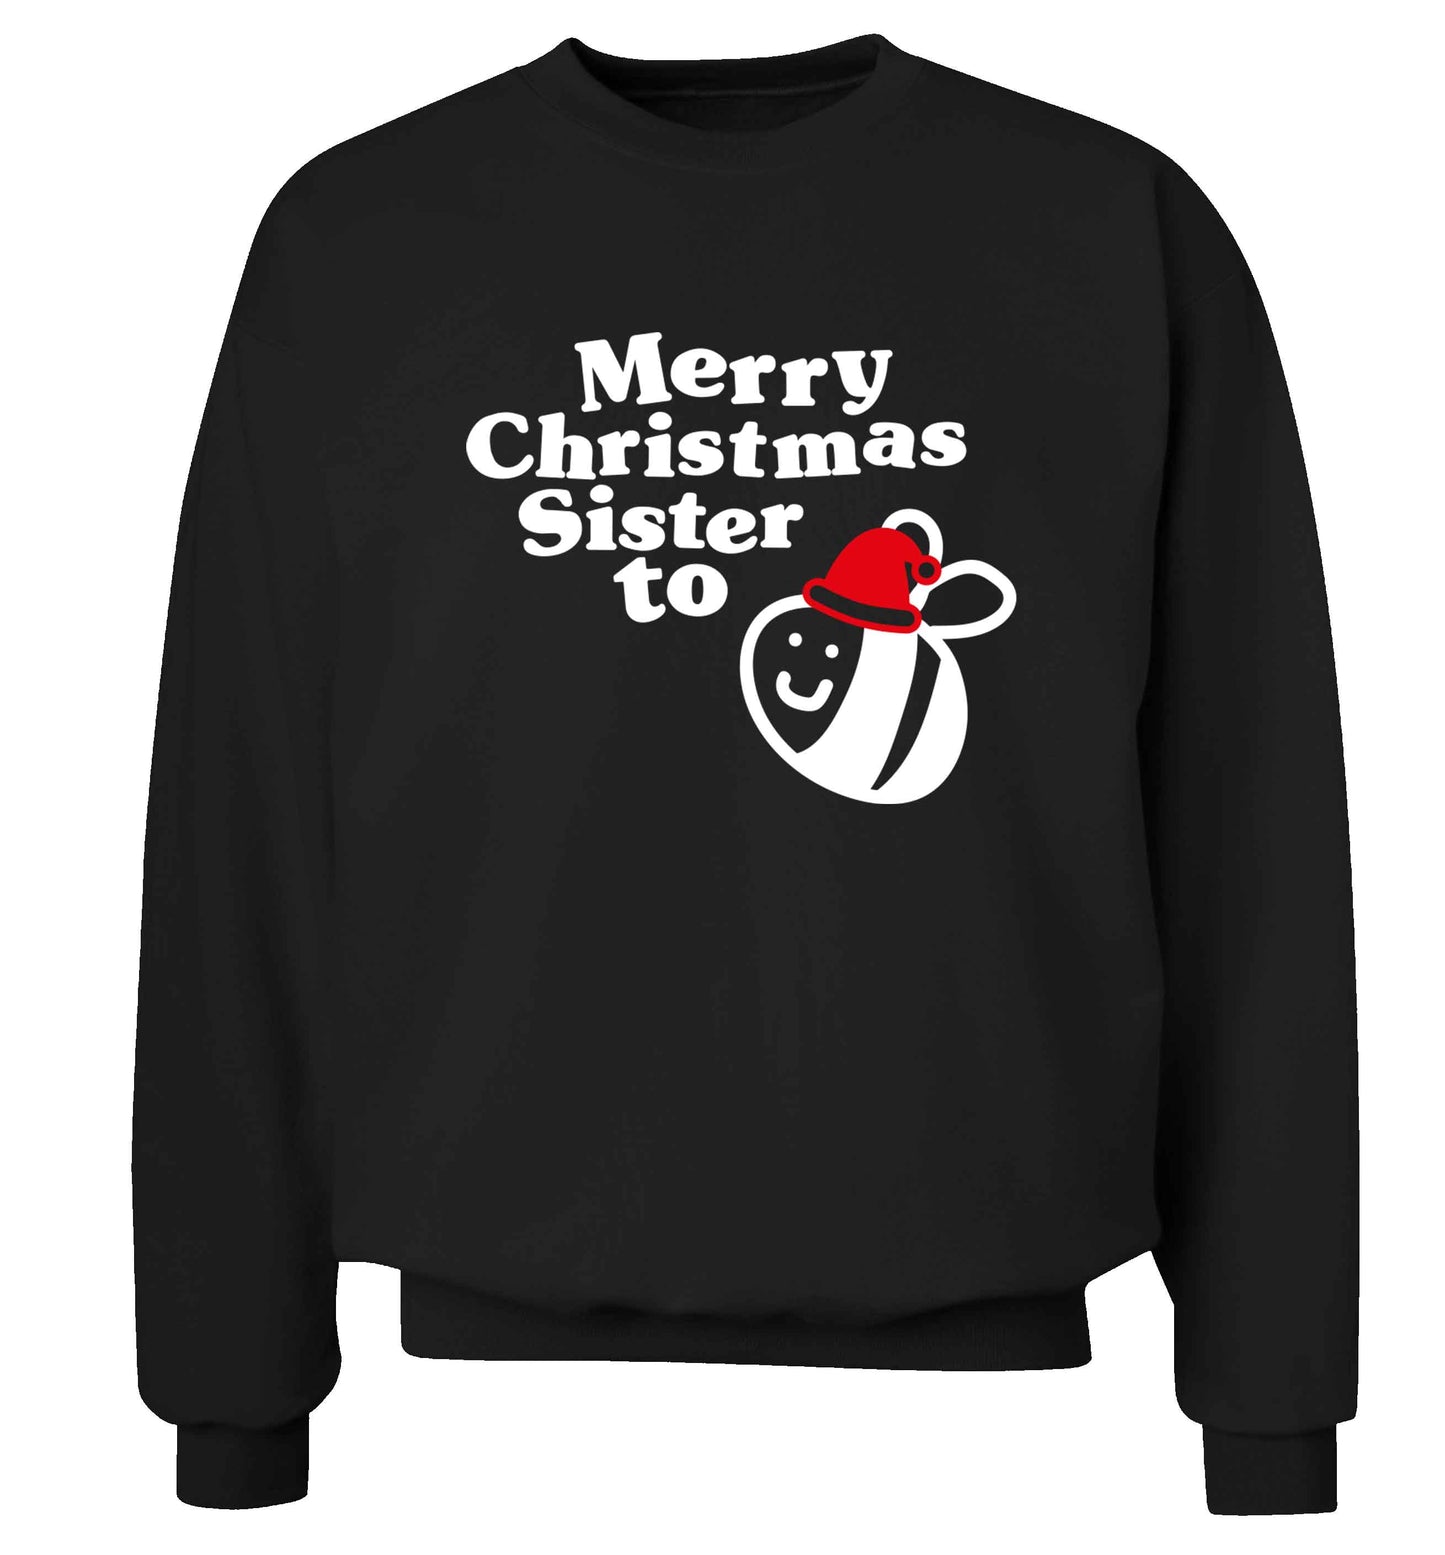 Merry Christmas sister to be Adult's unisex black Sweater 2XL